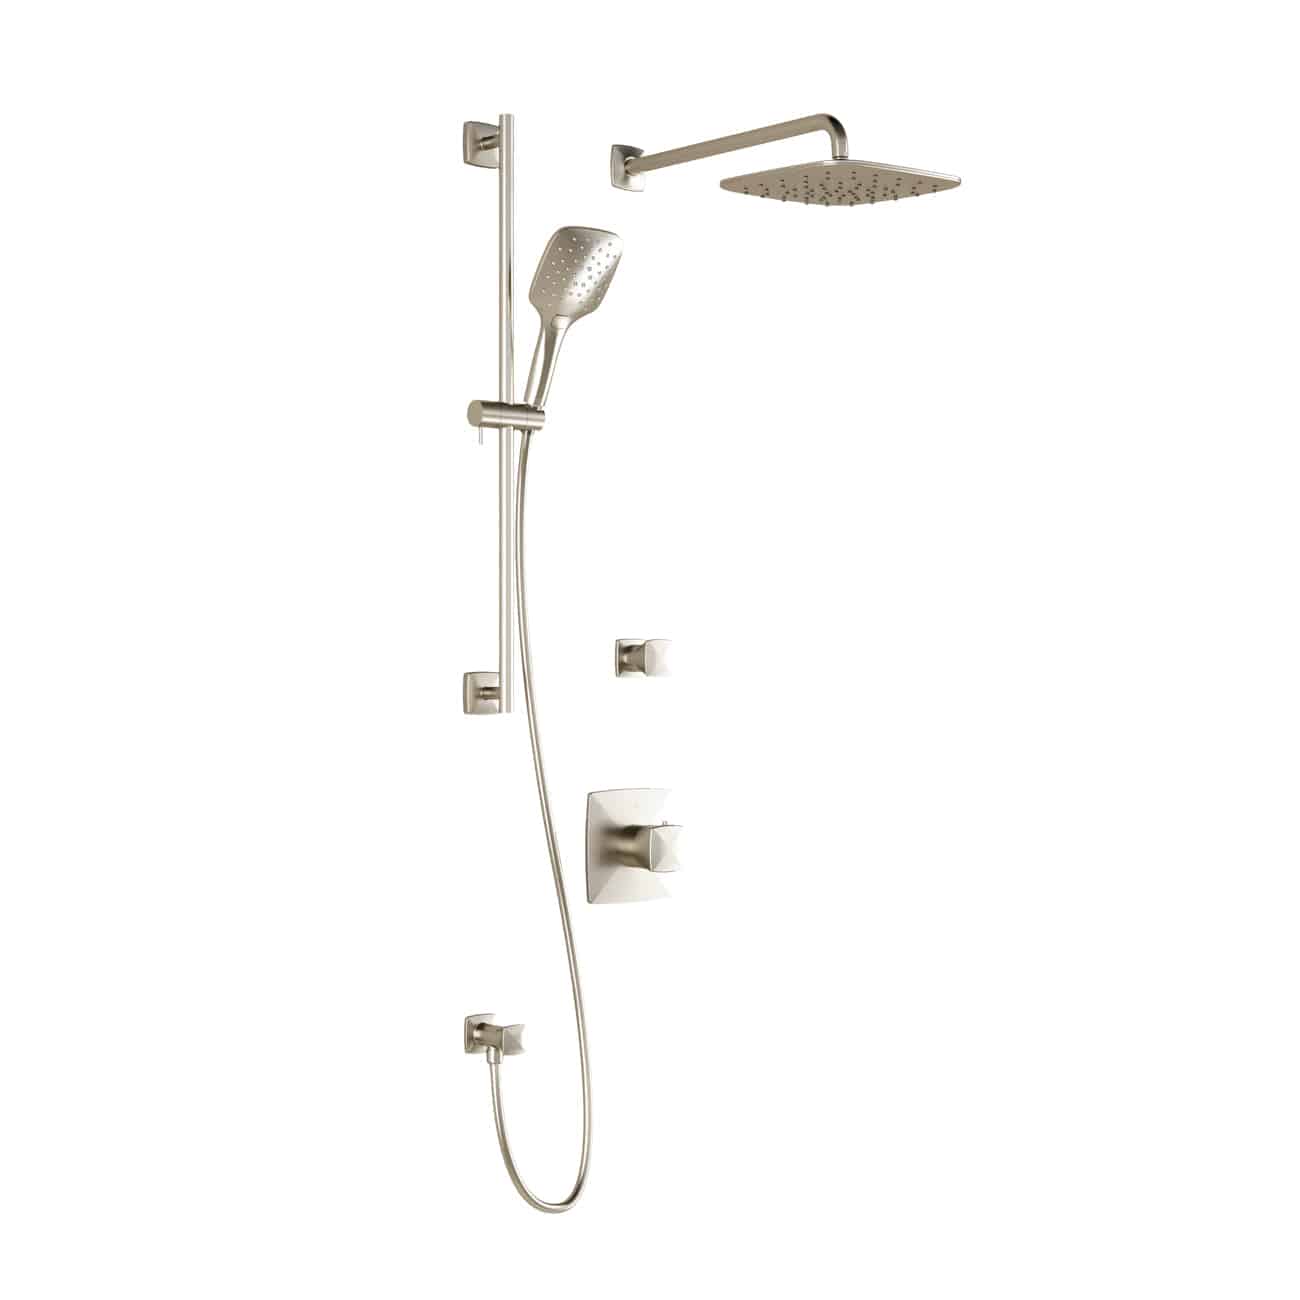 Kalia UMANI T2 PLUS (Valves Not Included) AQUATONIK T/P Shower System with Wall Arm and 9" Square Rain Shower Head- Brushed Nickel PVD